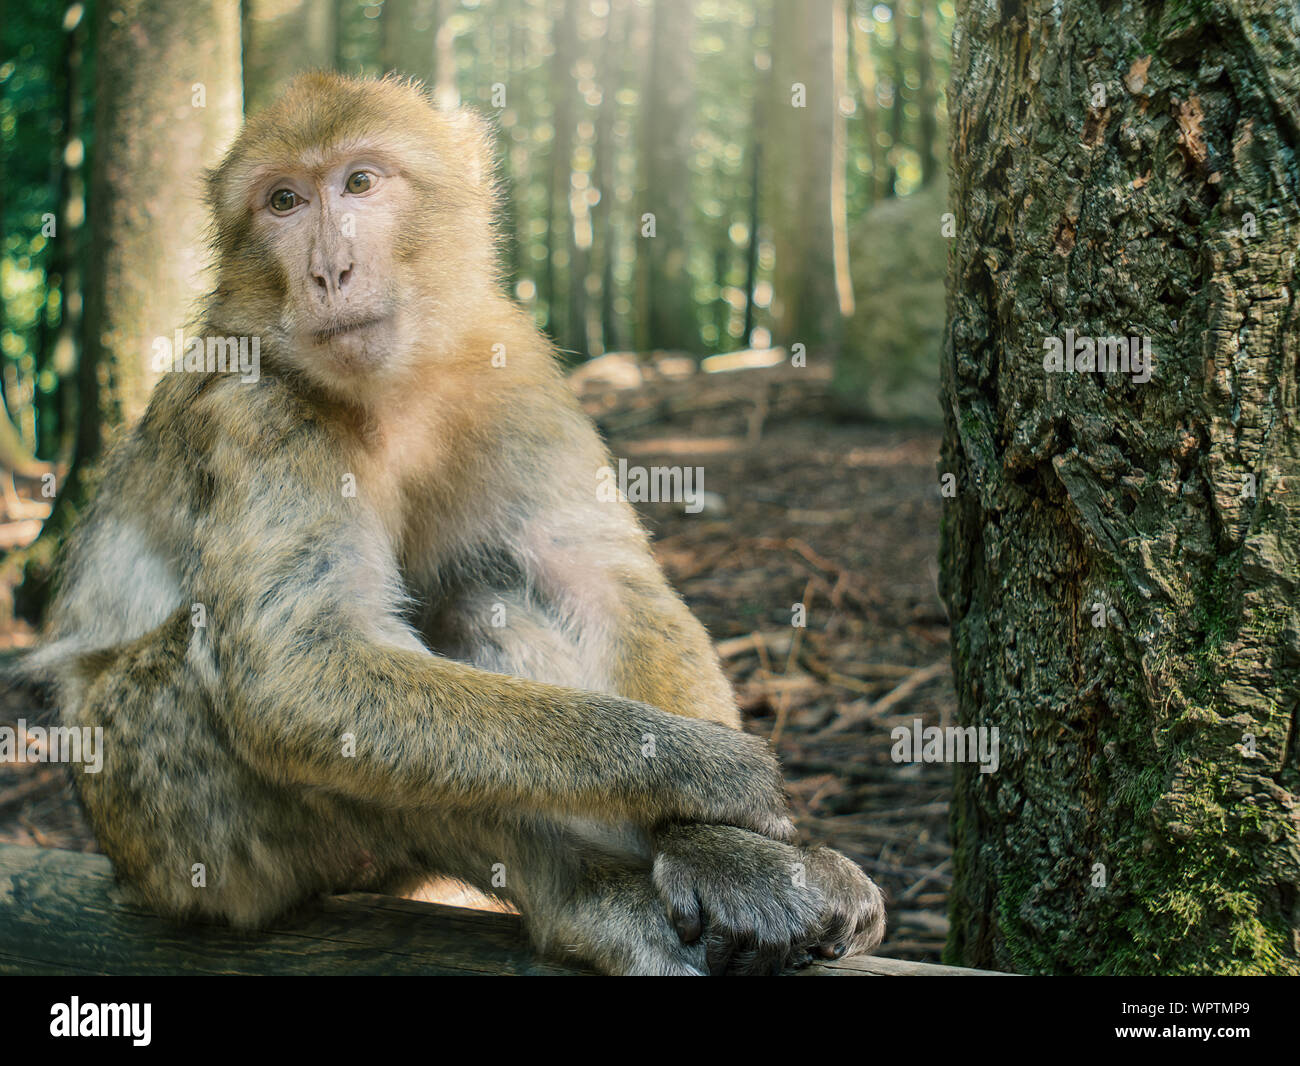 Portrait of sitting Berber monkey in the forest Stock Photo